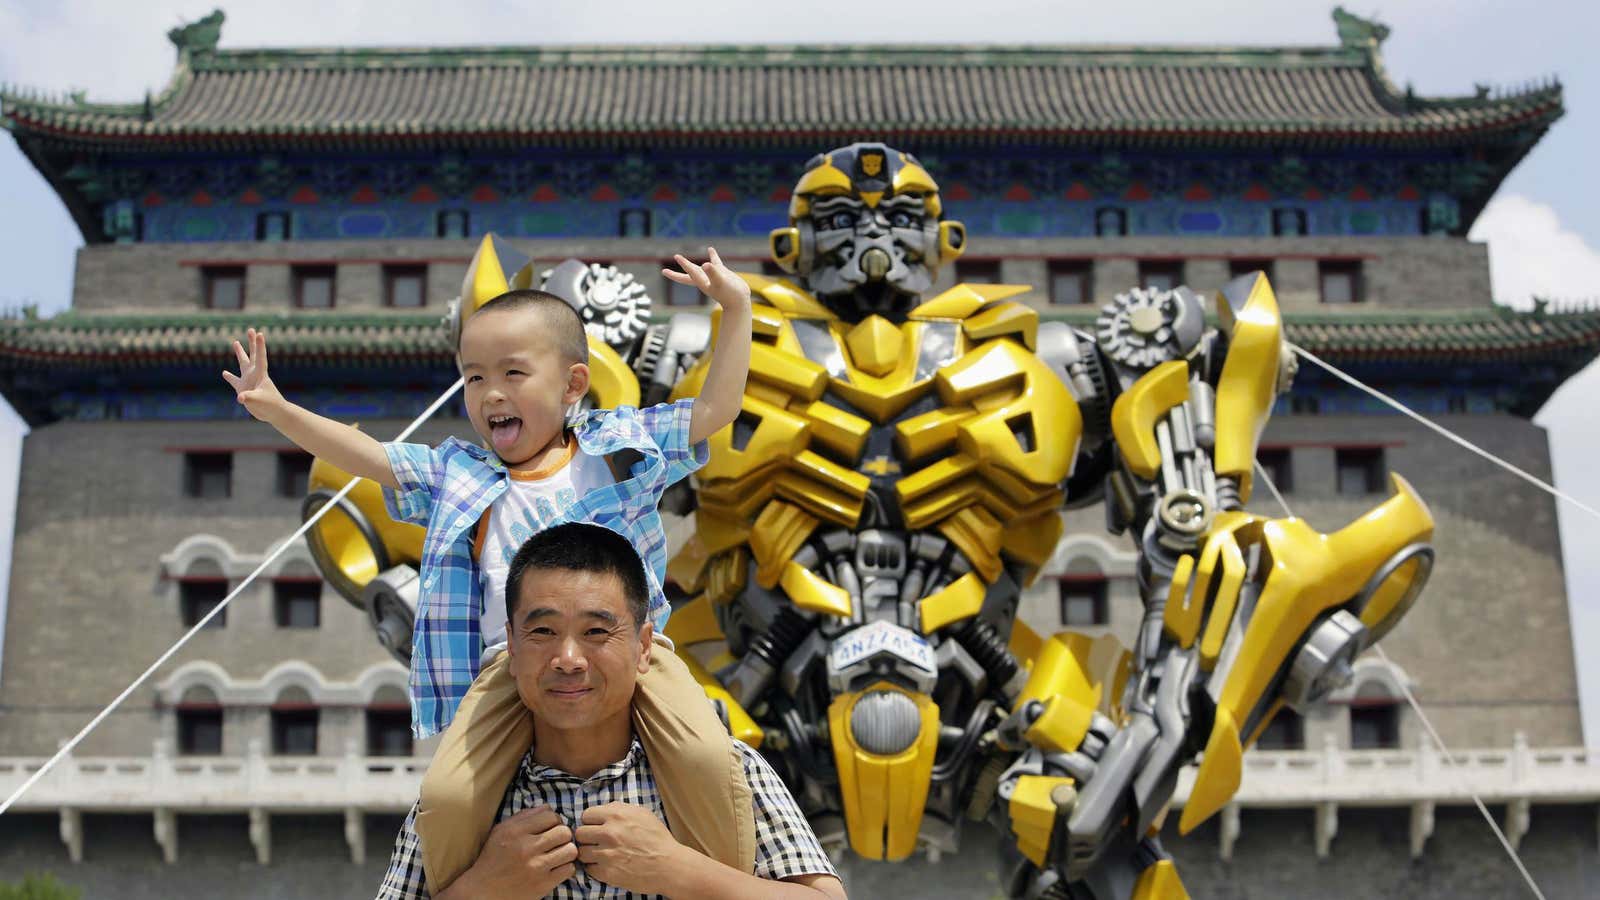 One of Bumblebee’s many fans in China.